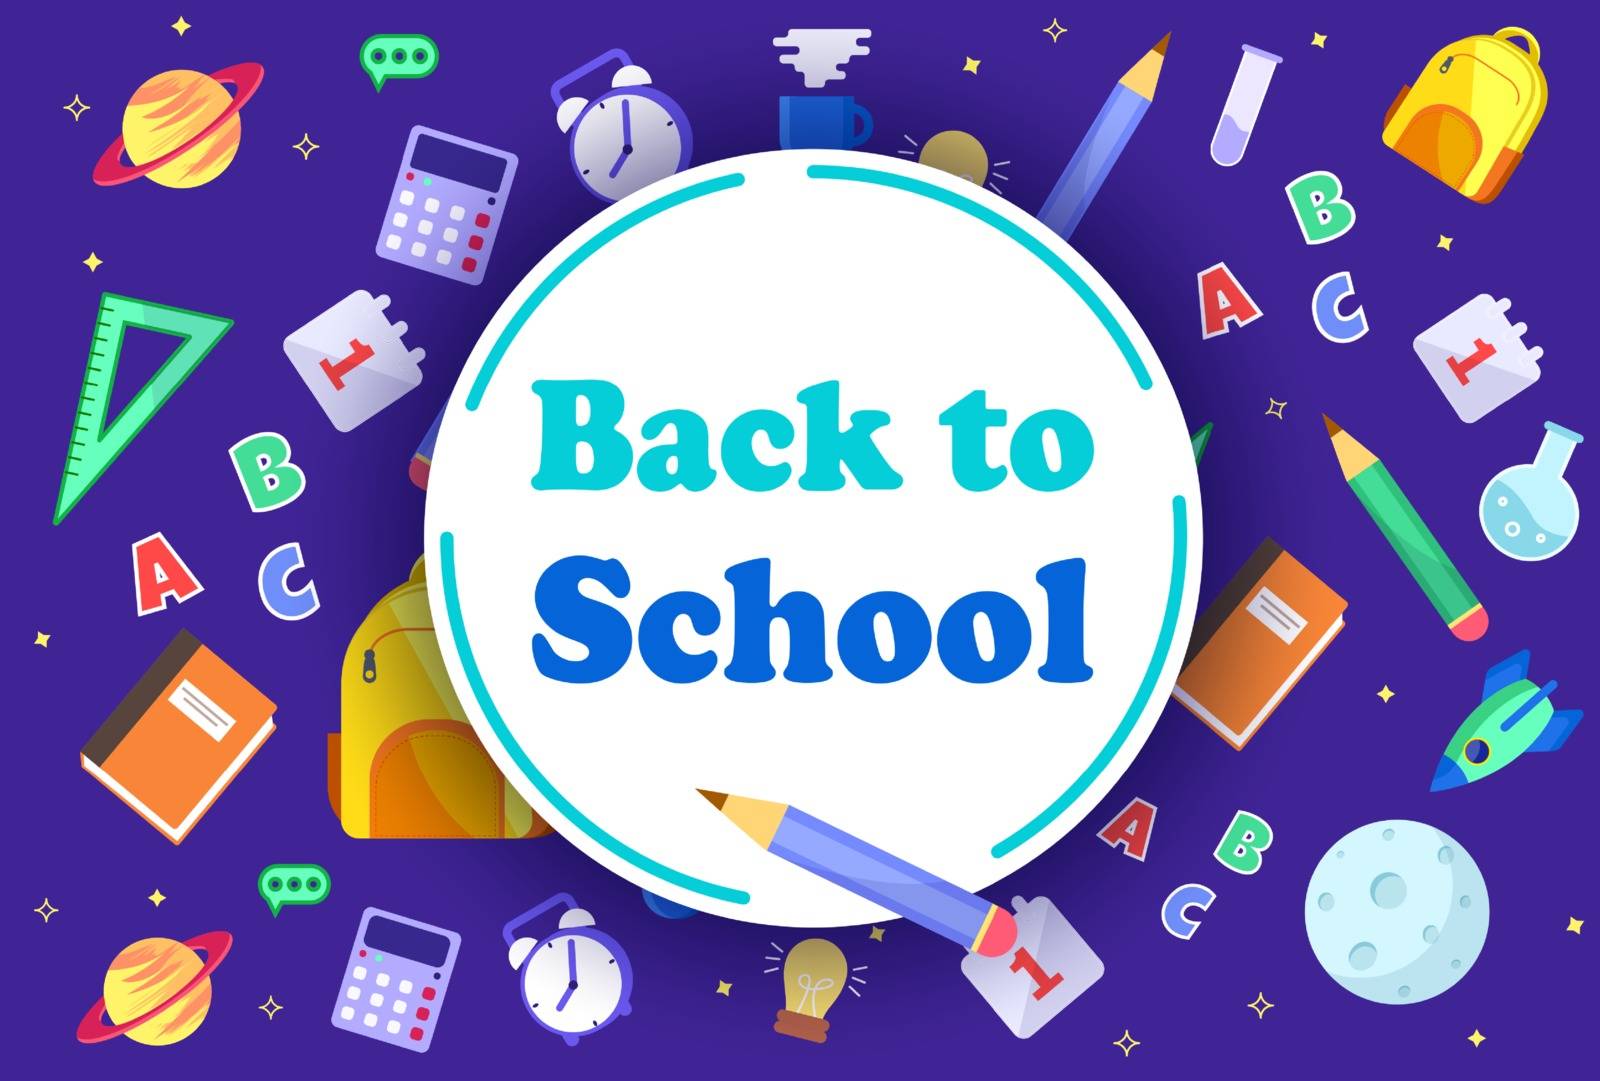 Colorful back to school templates for invitation, poster, banner, promotion,sale etc. School supplies cartoon illustration. Vector back to school design templates by Helenshi